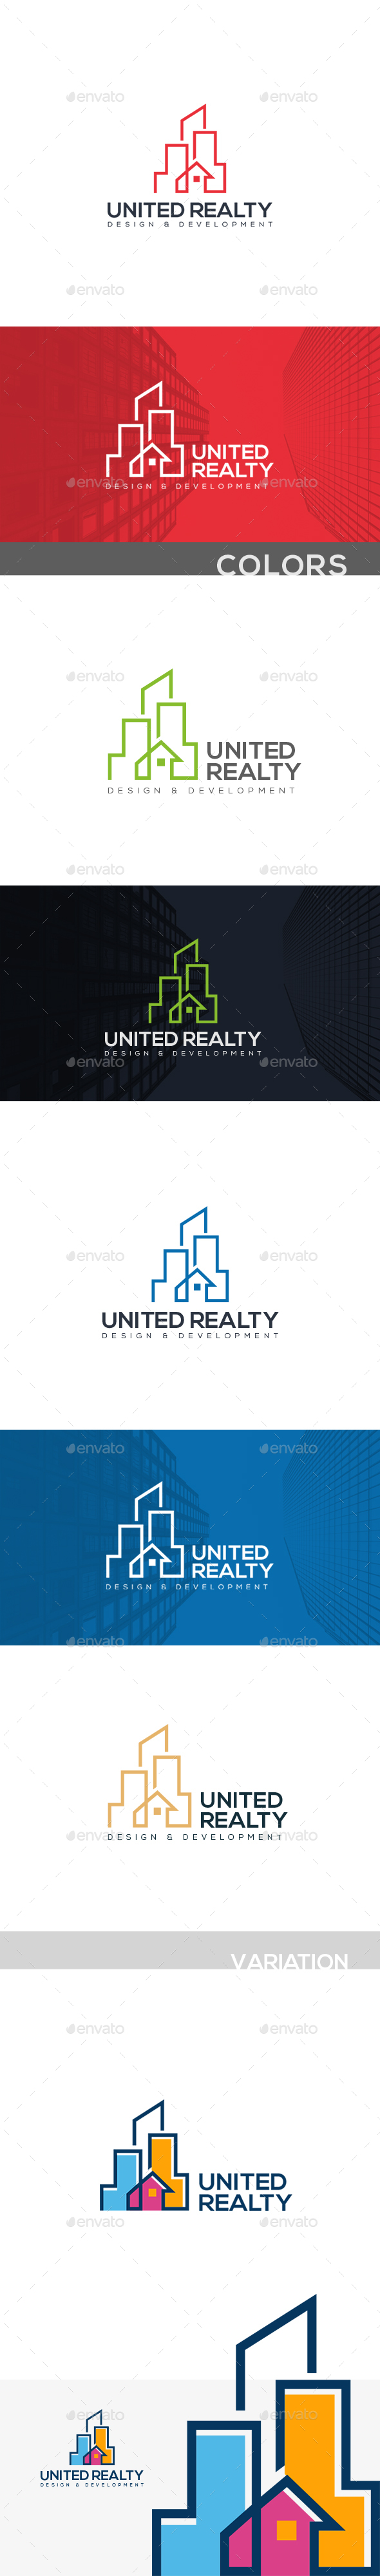 United Realty Logo Template